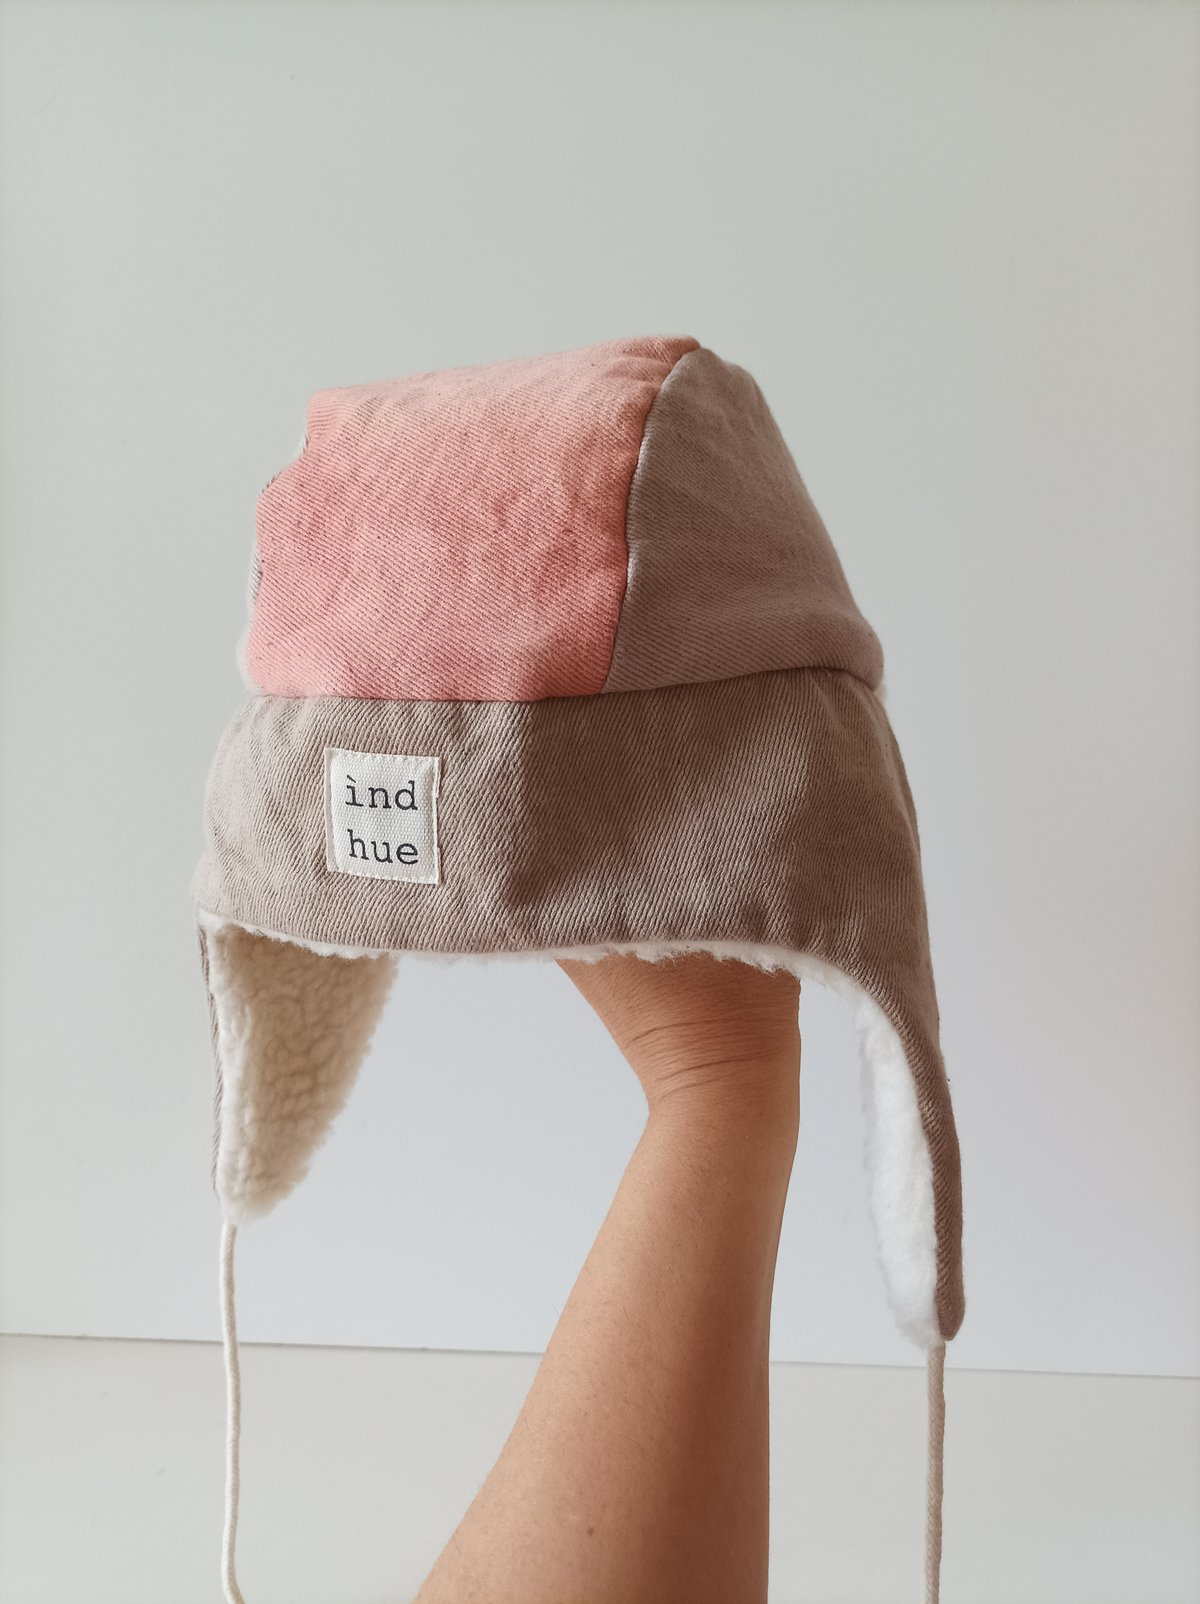 Image of "UNO PER TIPO"_ NATURALLY DYED HAT n 02